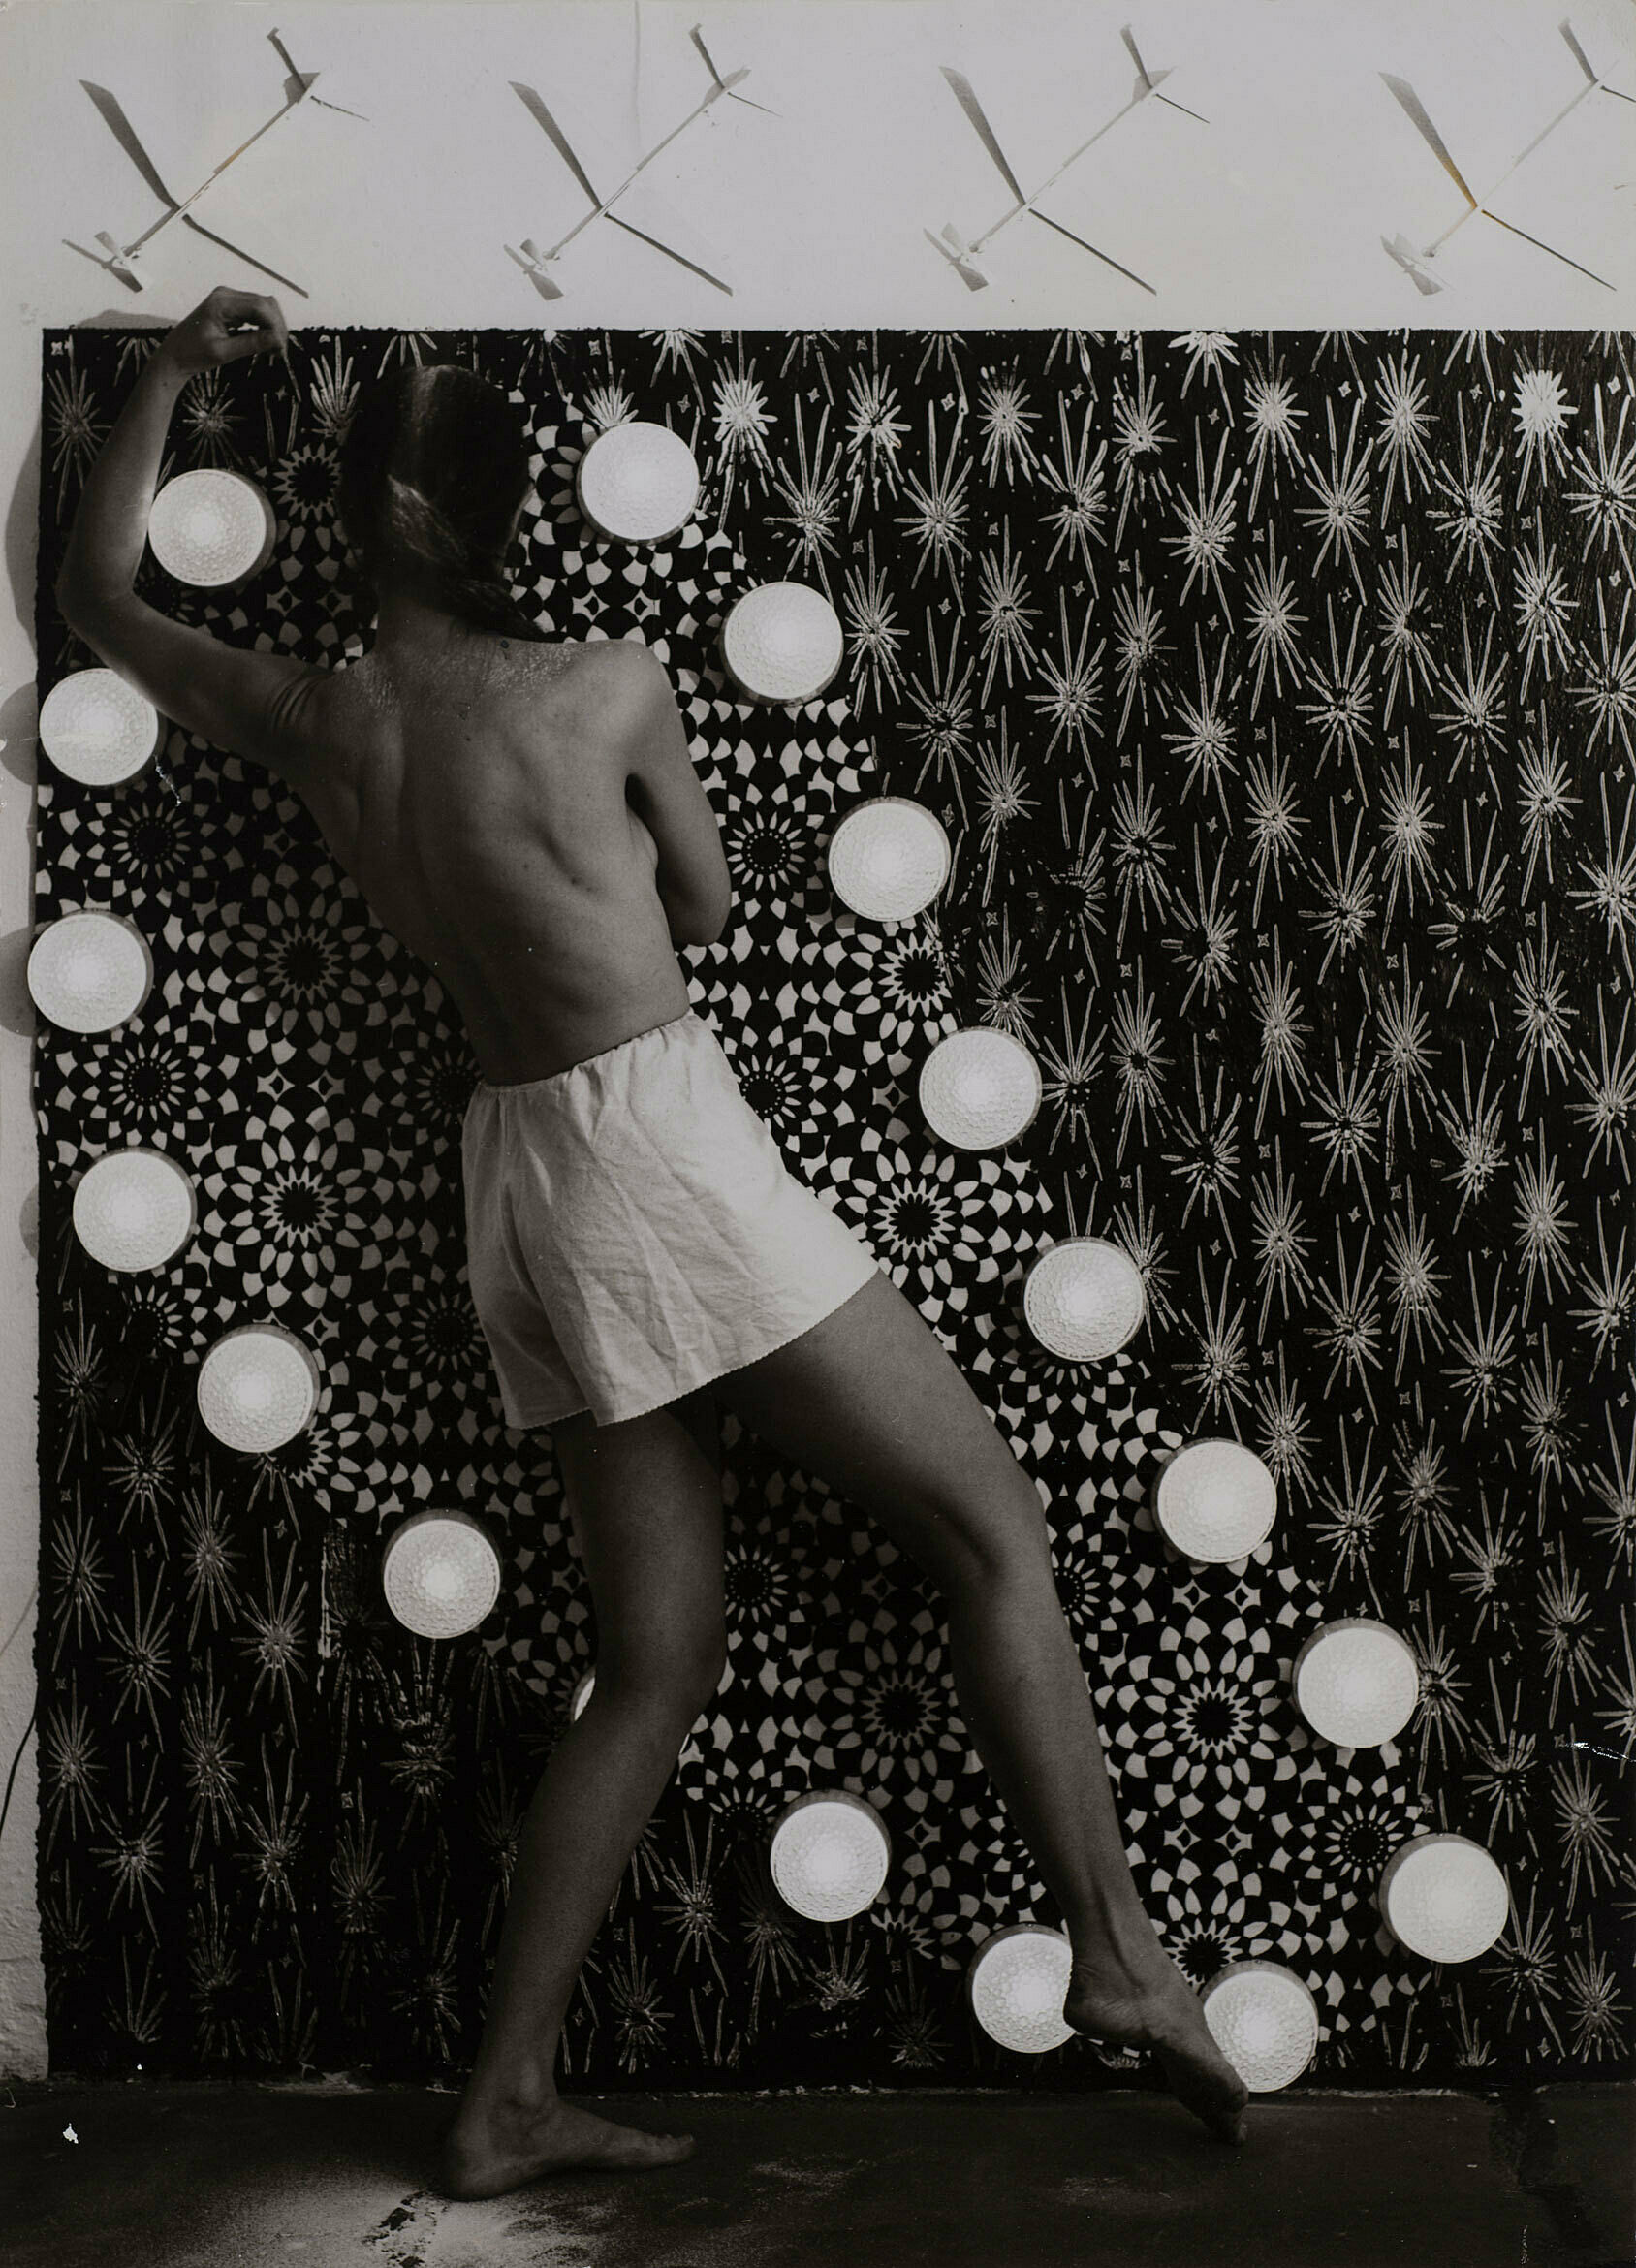 A topless woman stands with her back to the camera in front of a curtain.